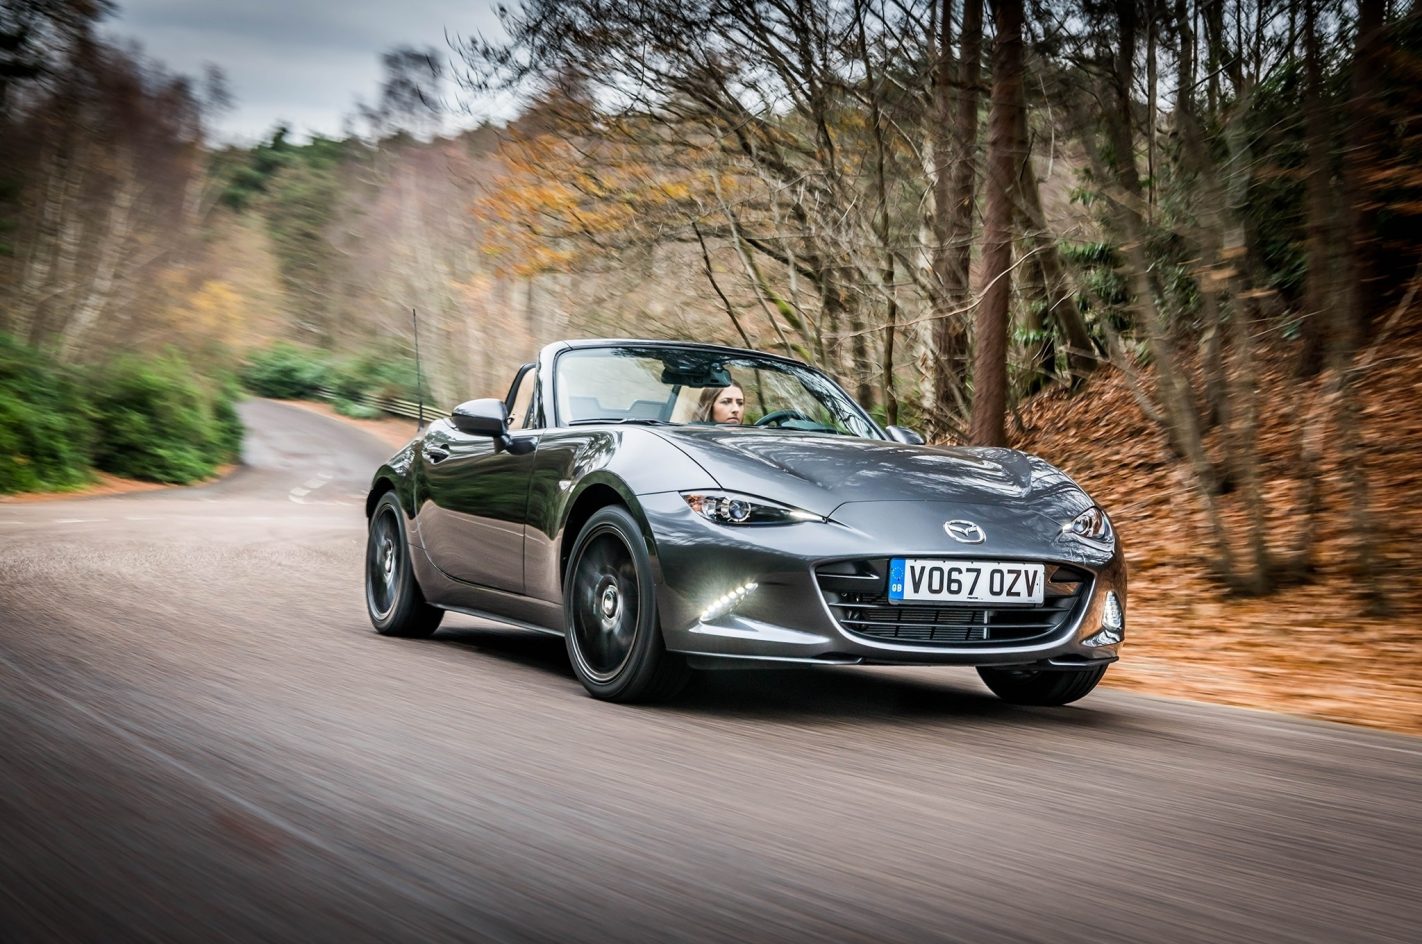 Mazda Miata 2019 Philippines Review: A cut above the rest of its competitors